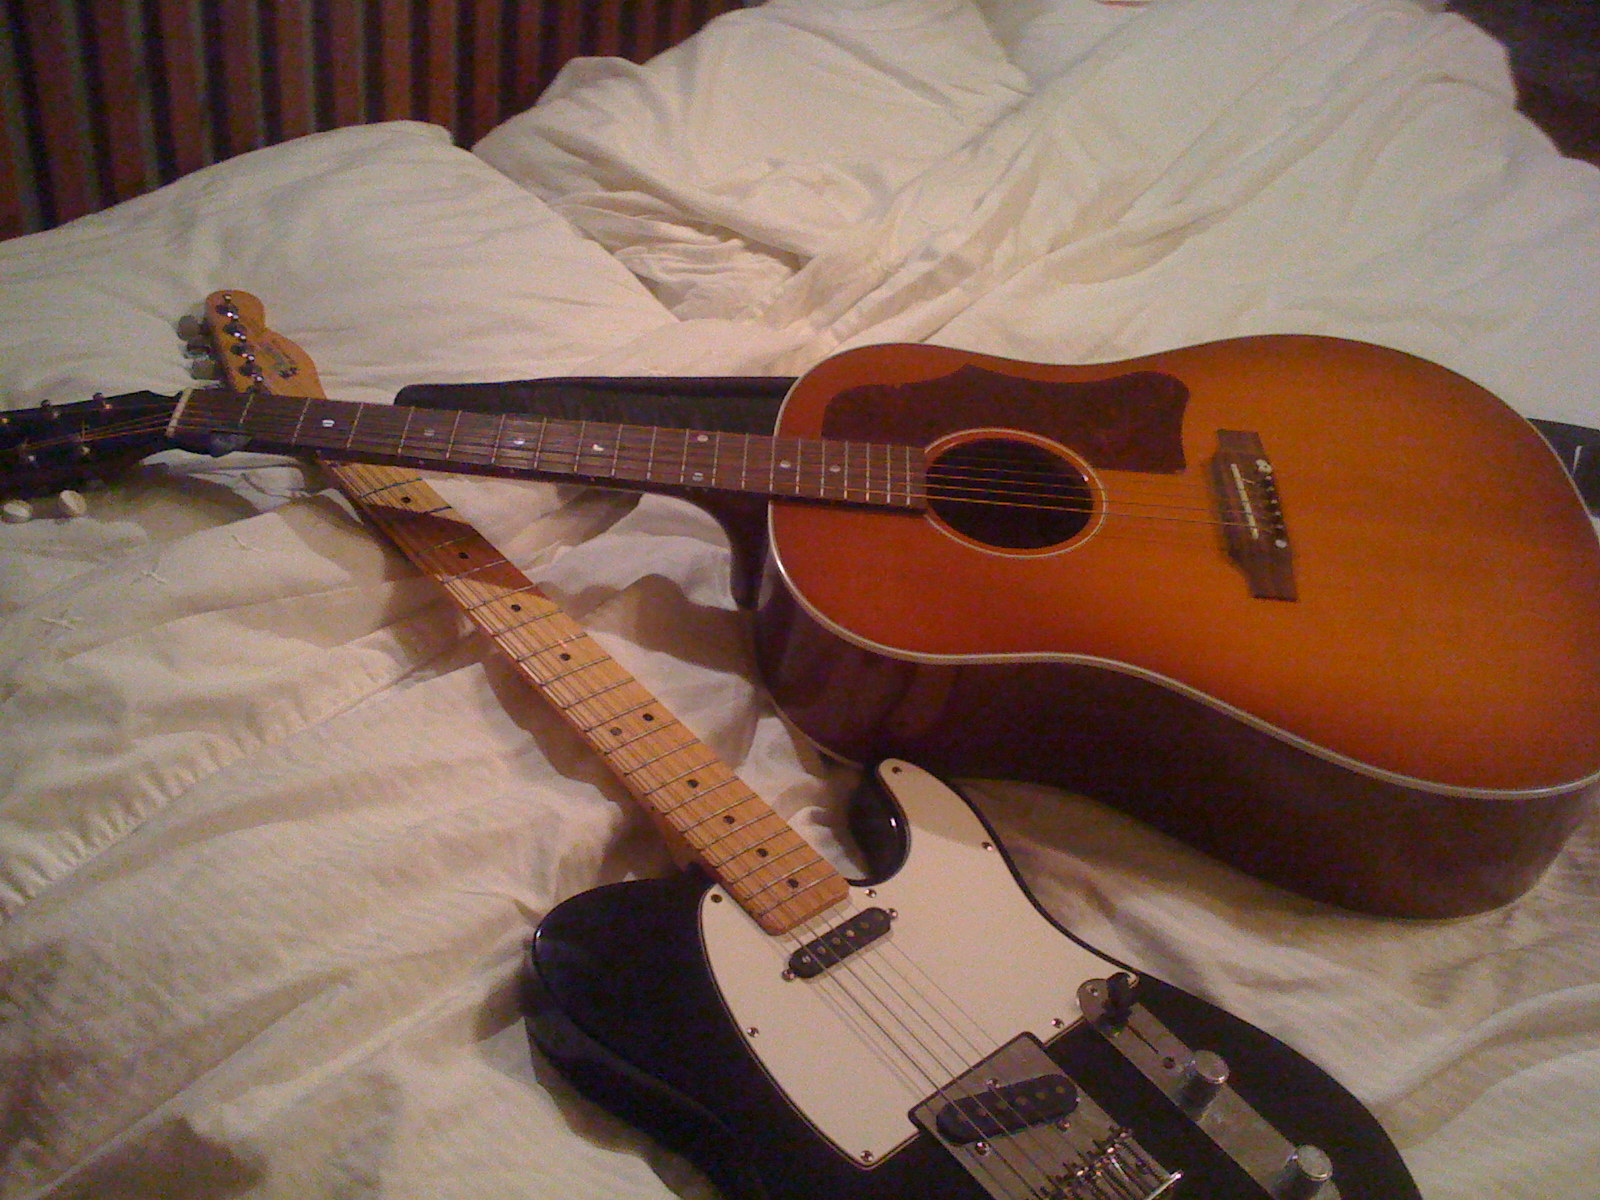 three guitars laying on a bed, one of which is a ukulele and one of which is a ukulele